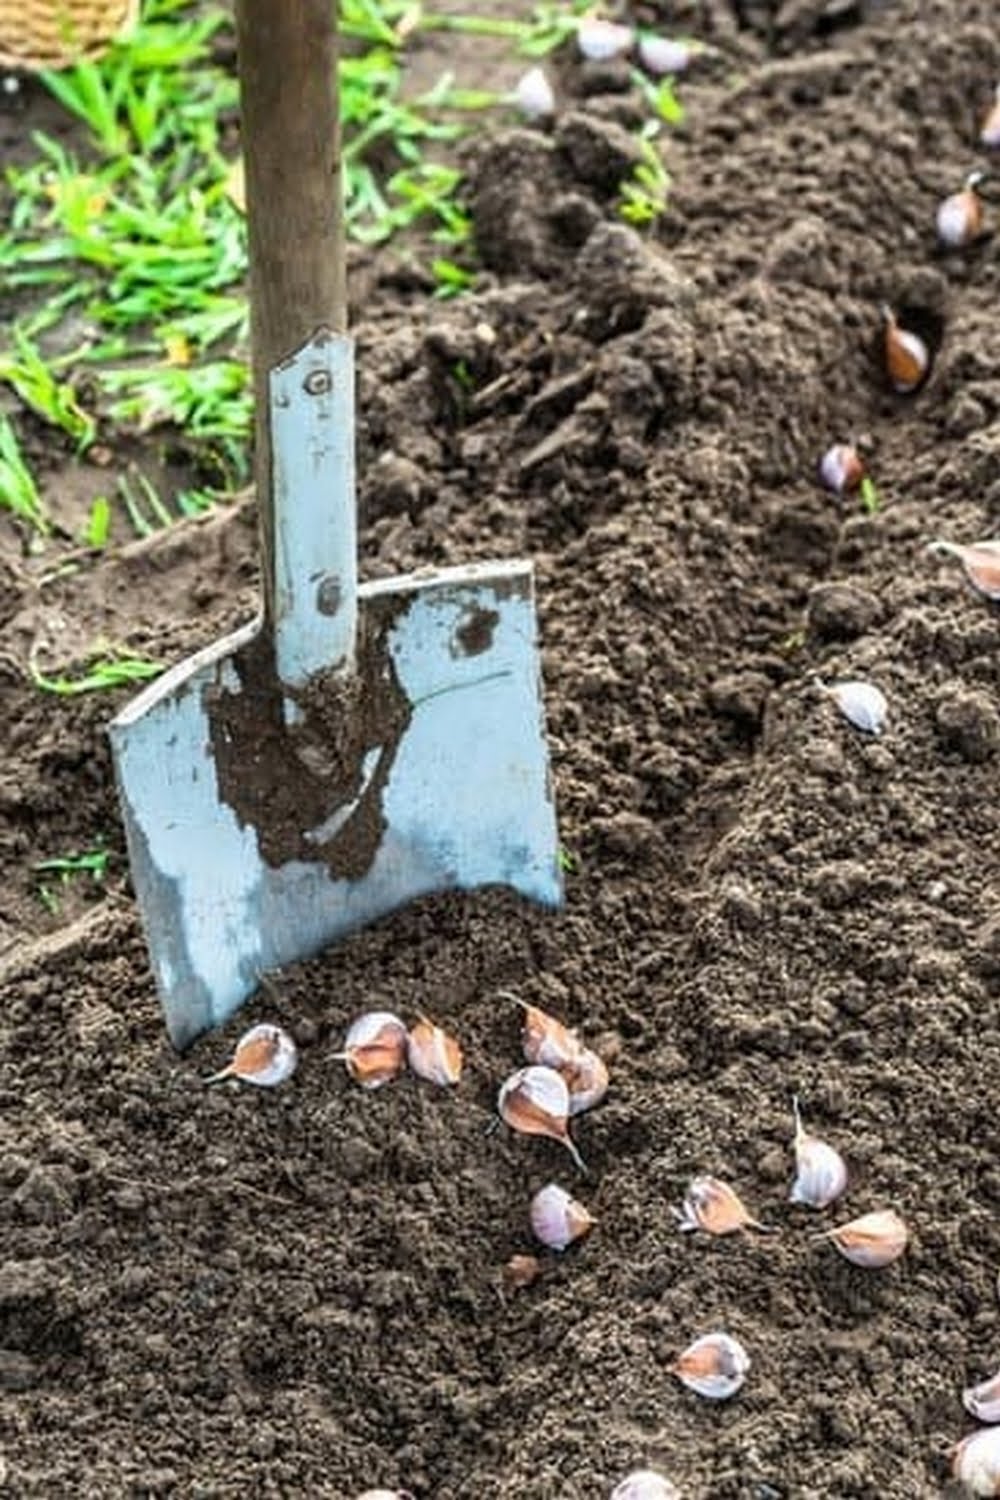 Planning Your Garden Soil and Plants